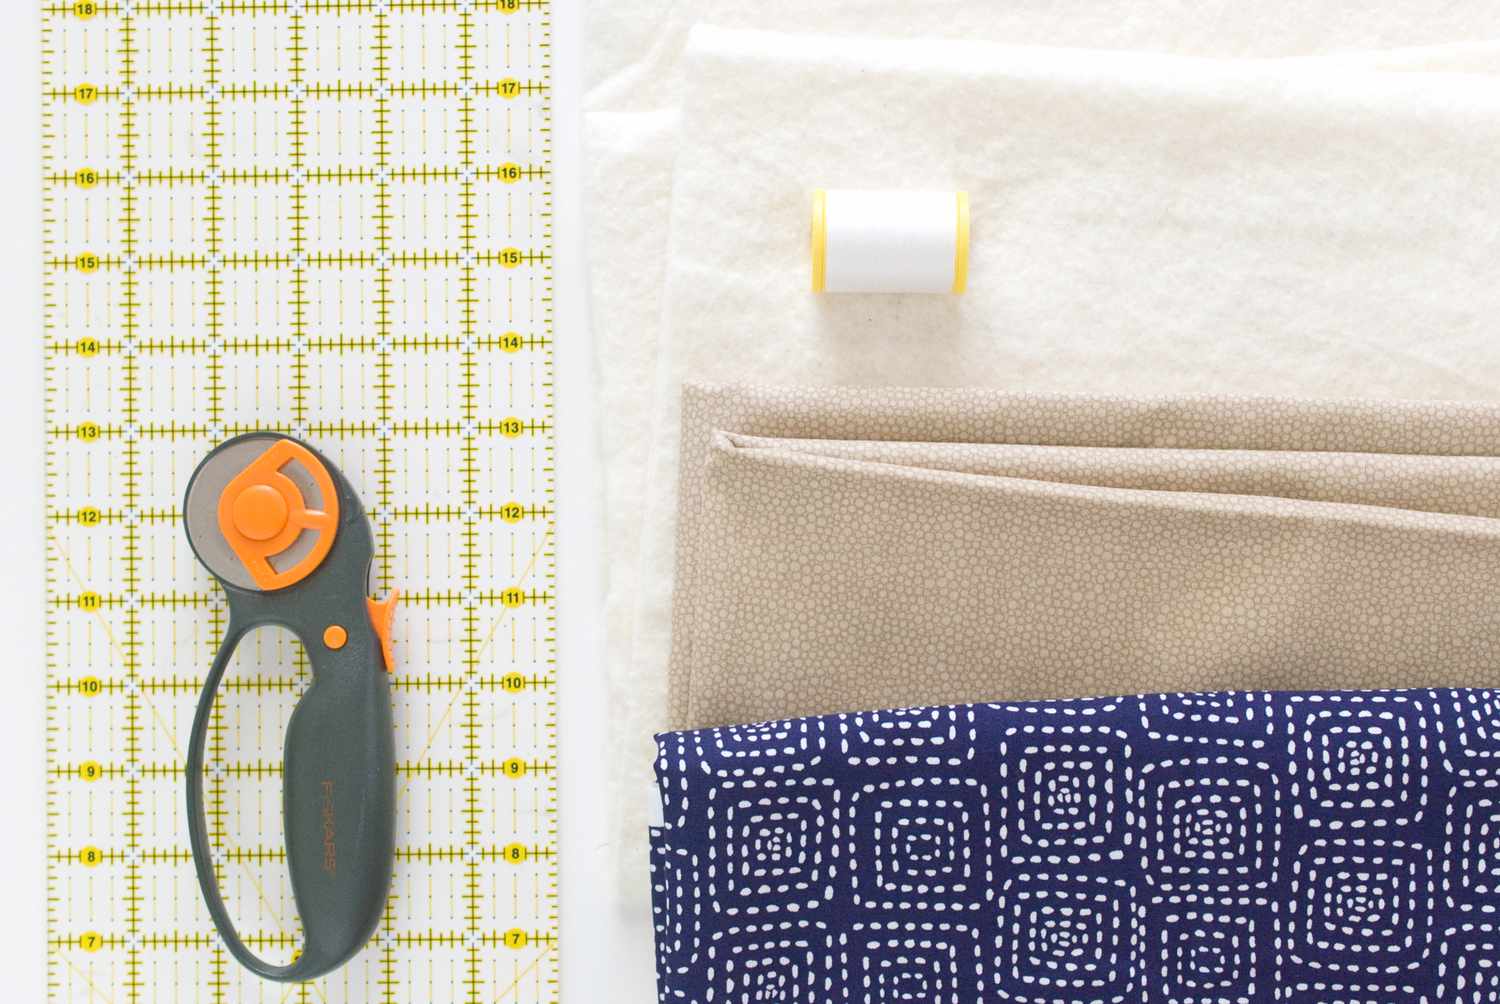 Fabric, thread, and a rotary cutter, the supplies for making your own microwave safe bowl holder